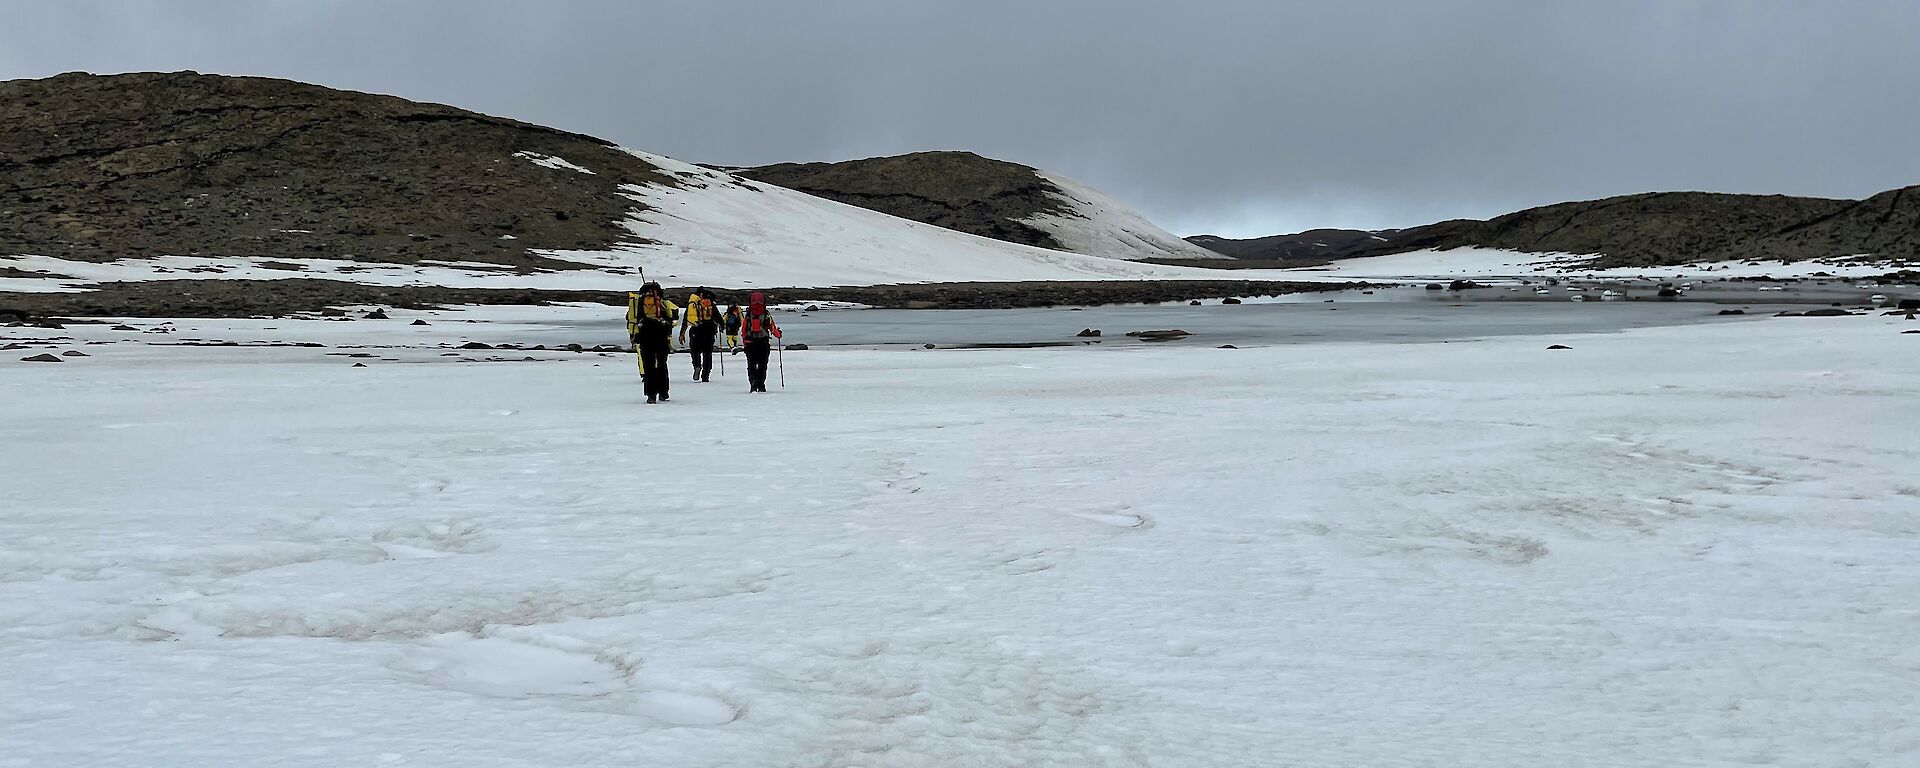 A group of three people in the distance wearing backpacks hiking across the snow towards an icy lake.